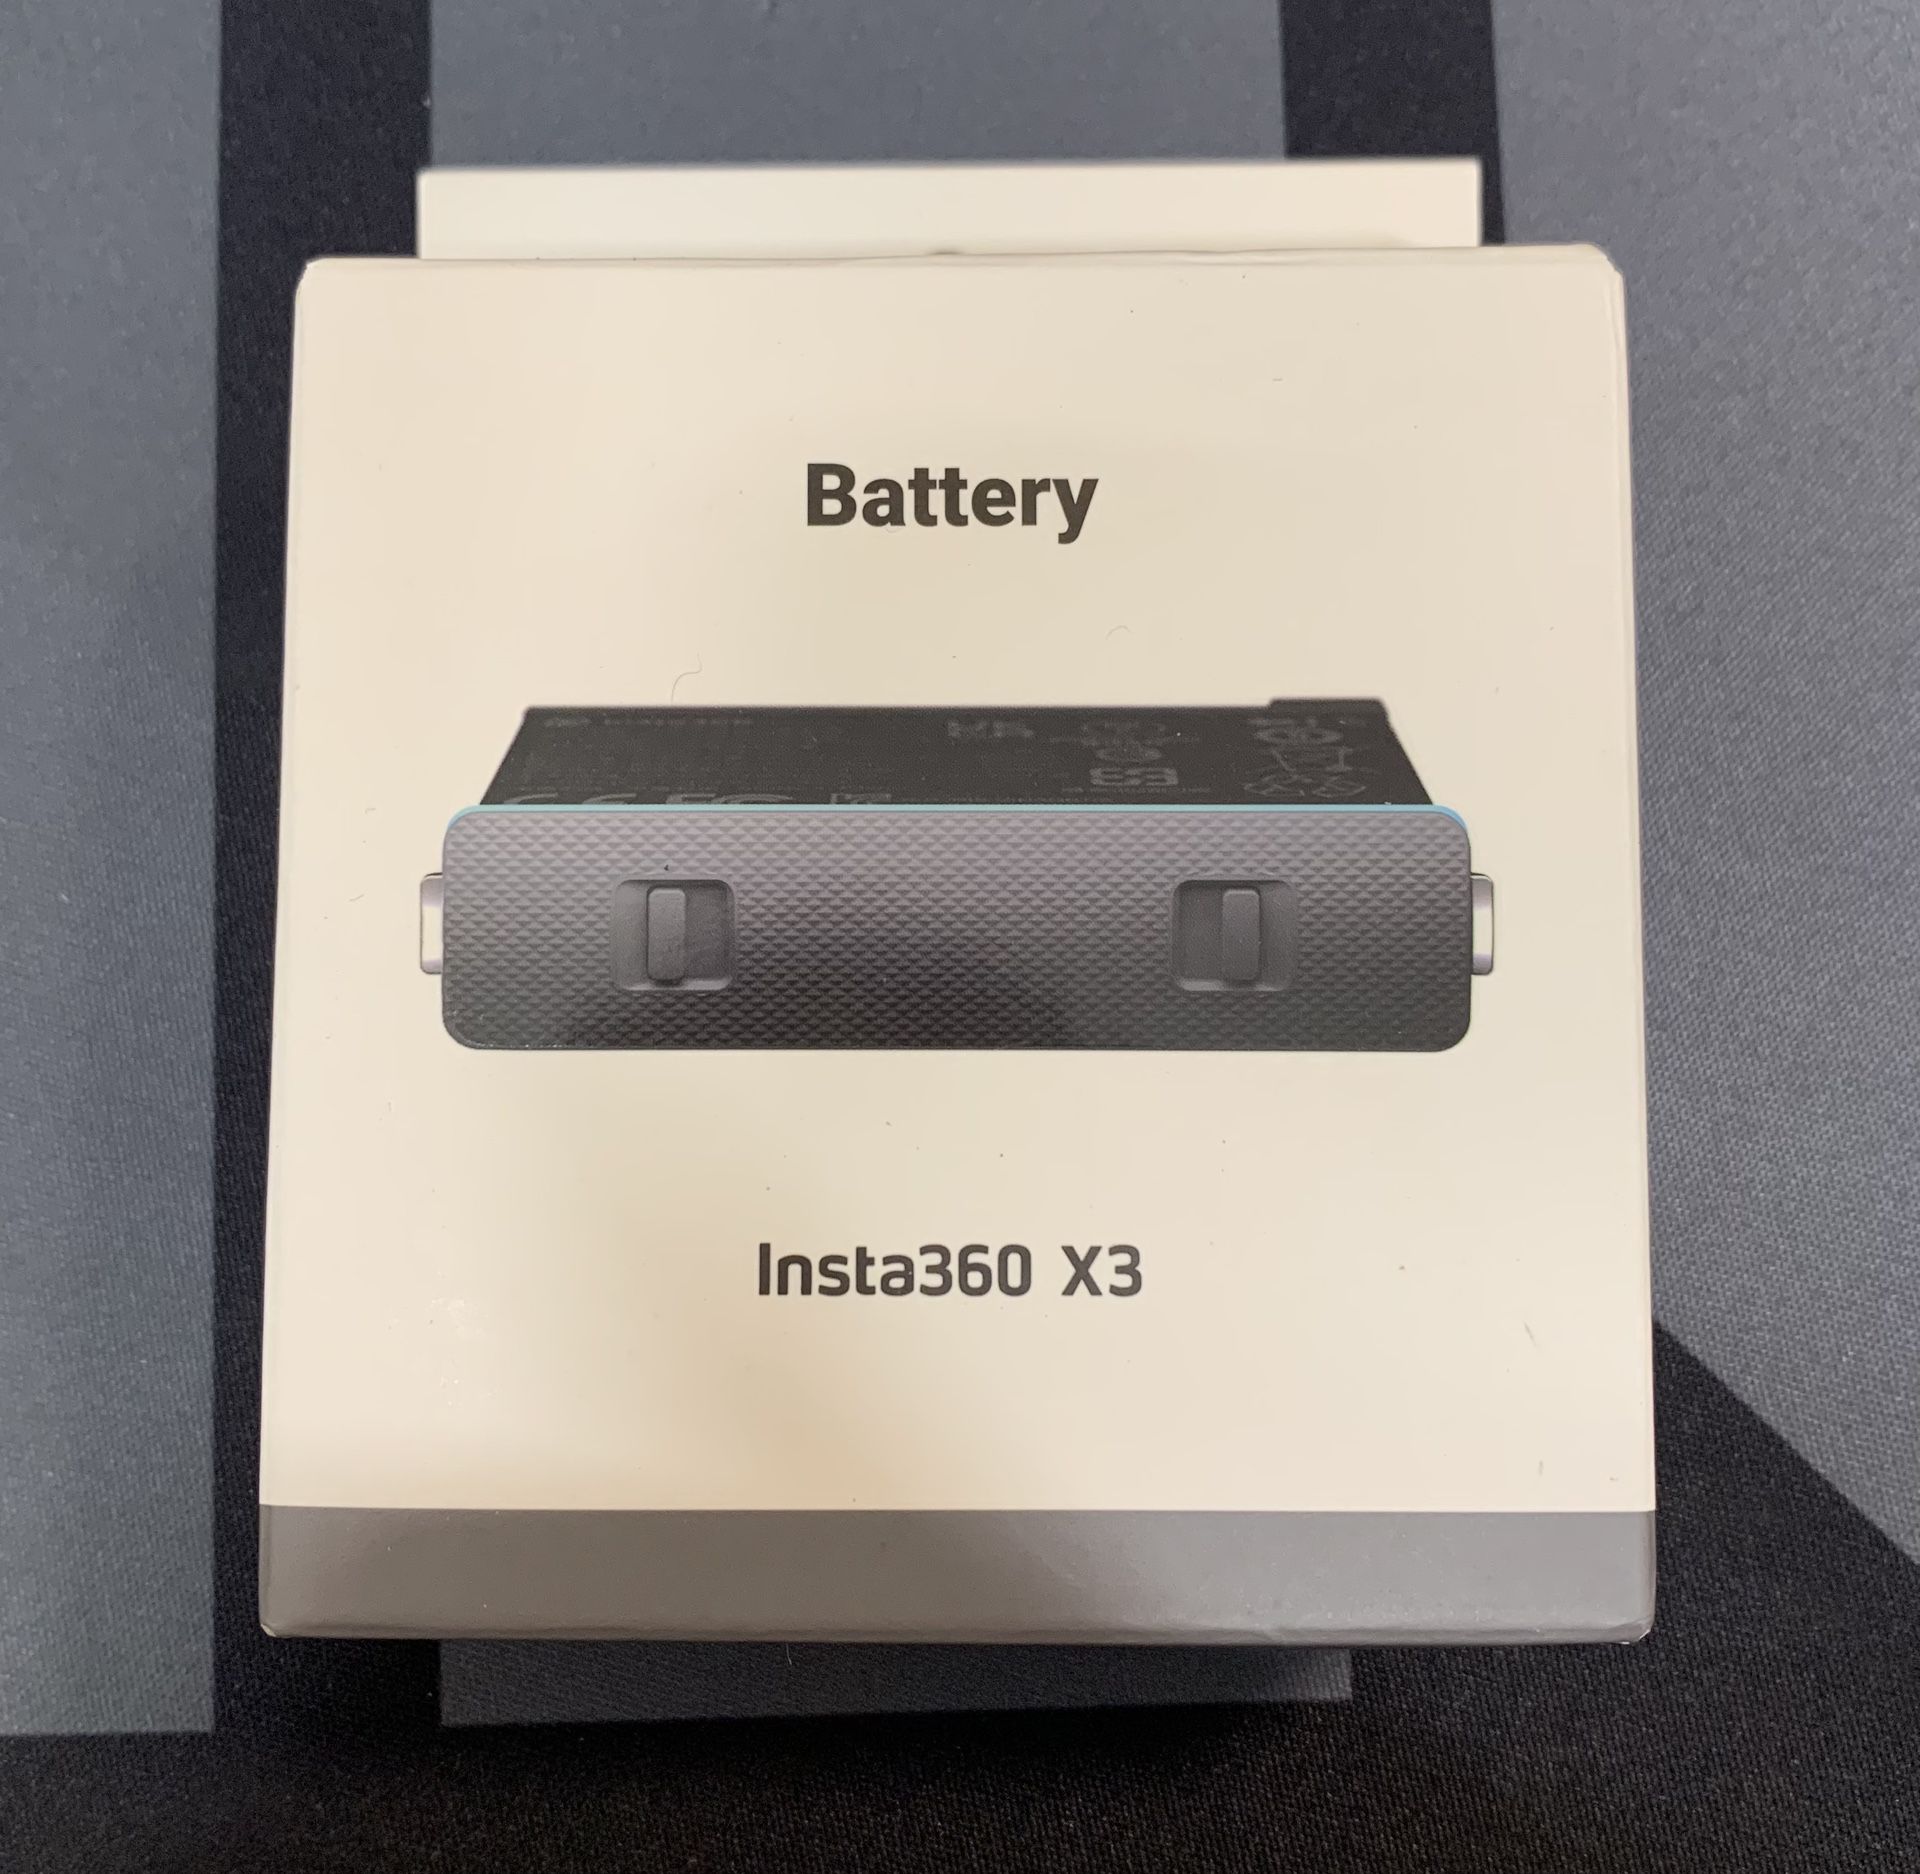 Insta360 - Rechargeable Lithium Polymer Battery for X3 Action Camera